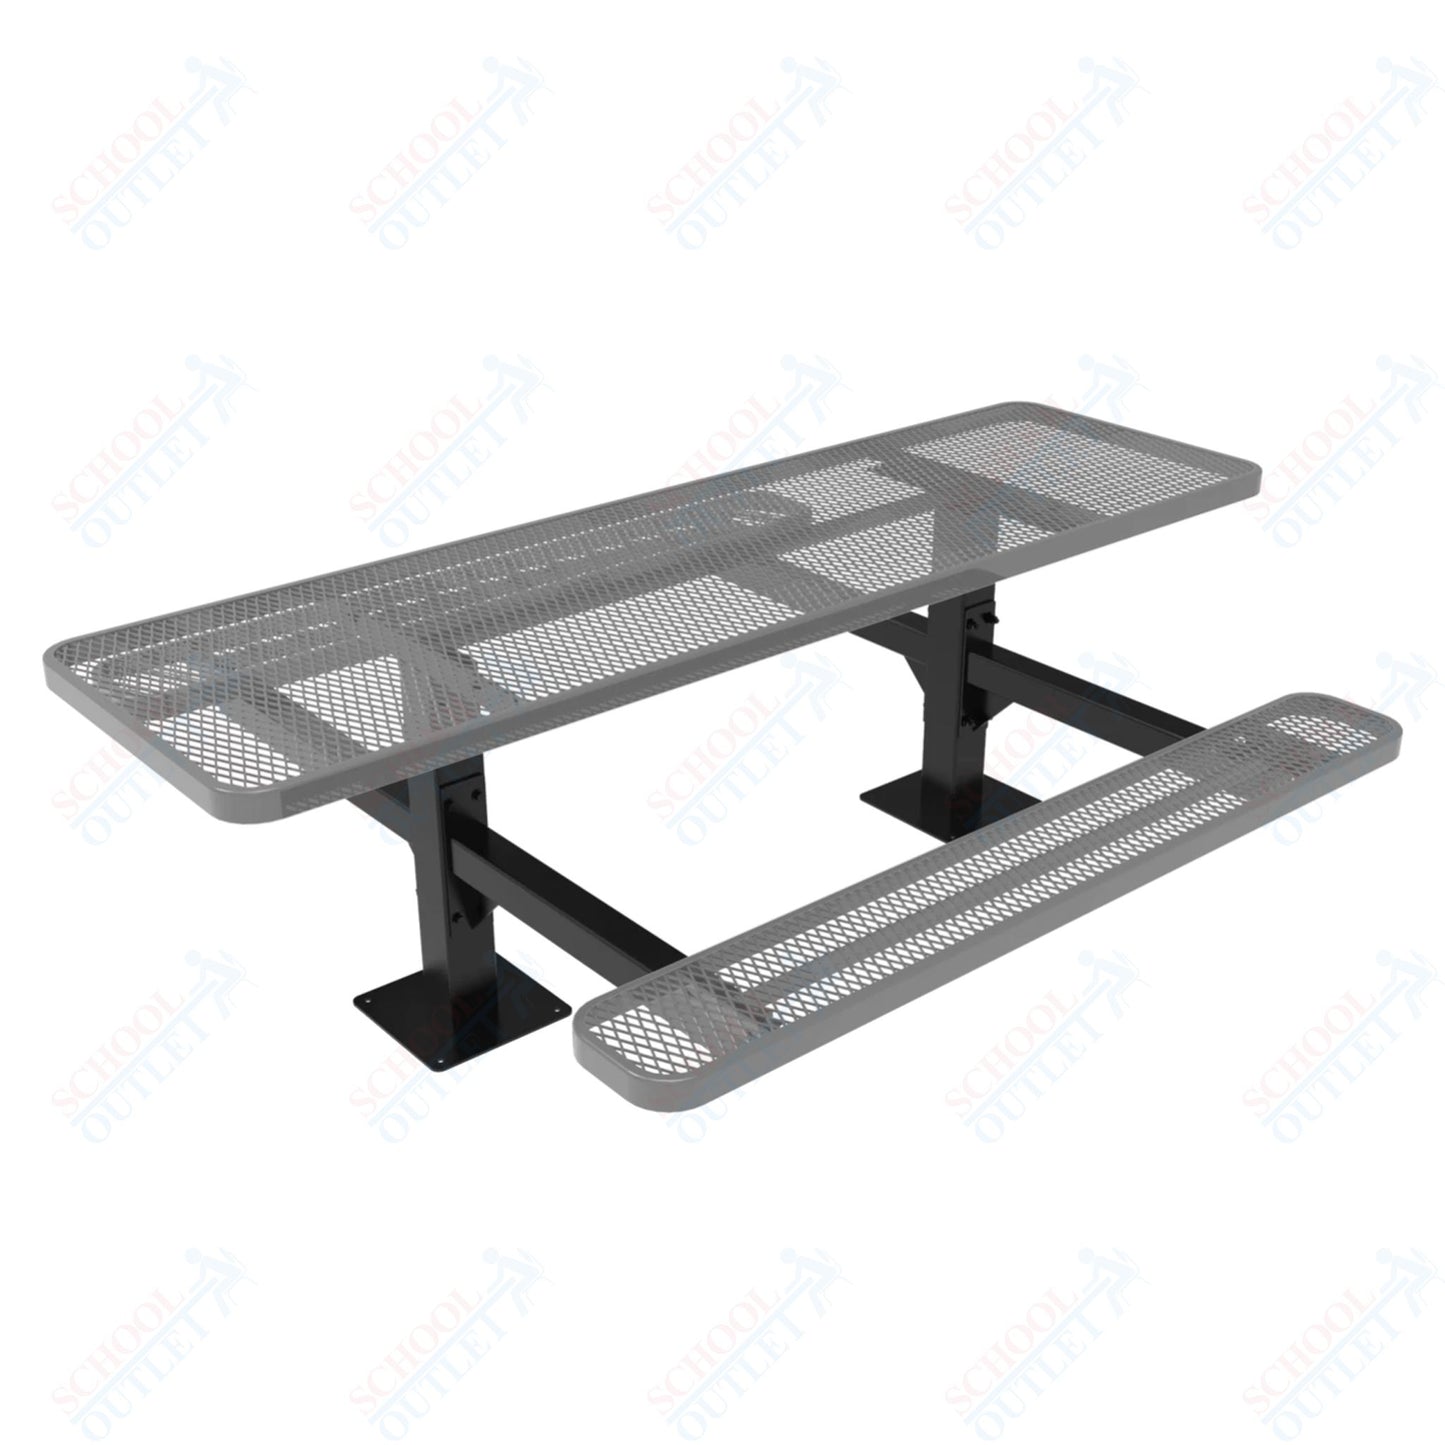 MyTcoat MYT-TRT08-09-002 8' Rectangular Double Pedestal Picnic Table with Surface Mount and Alternate ADA Accessible (96"W x 75.5"D x 30"H)